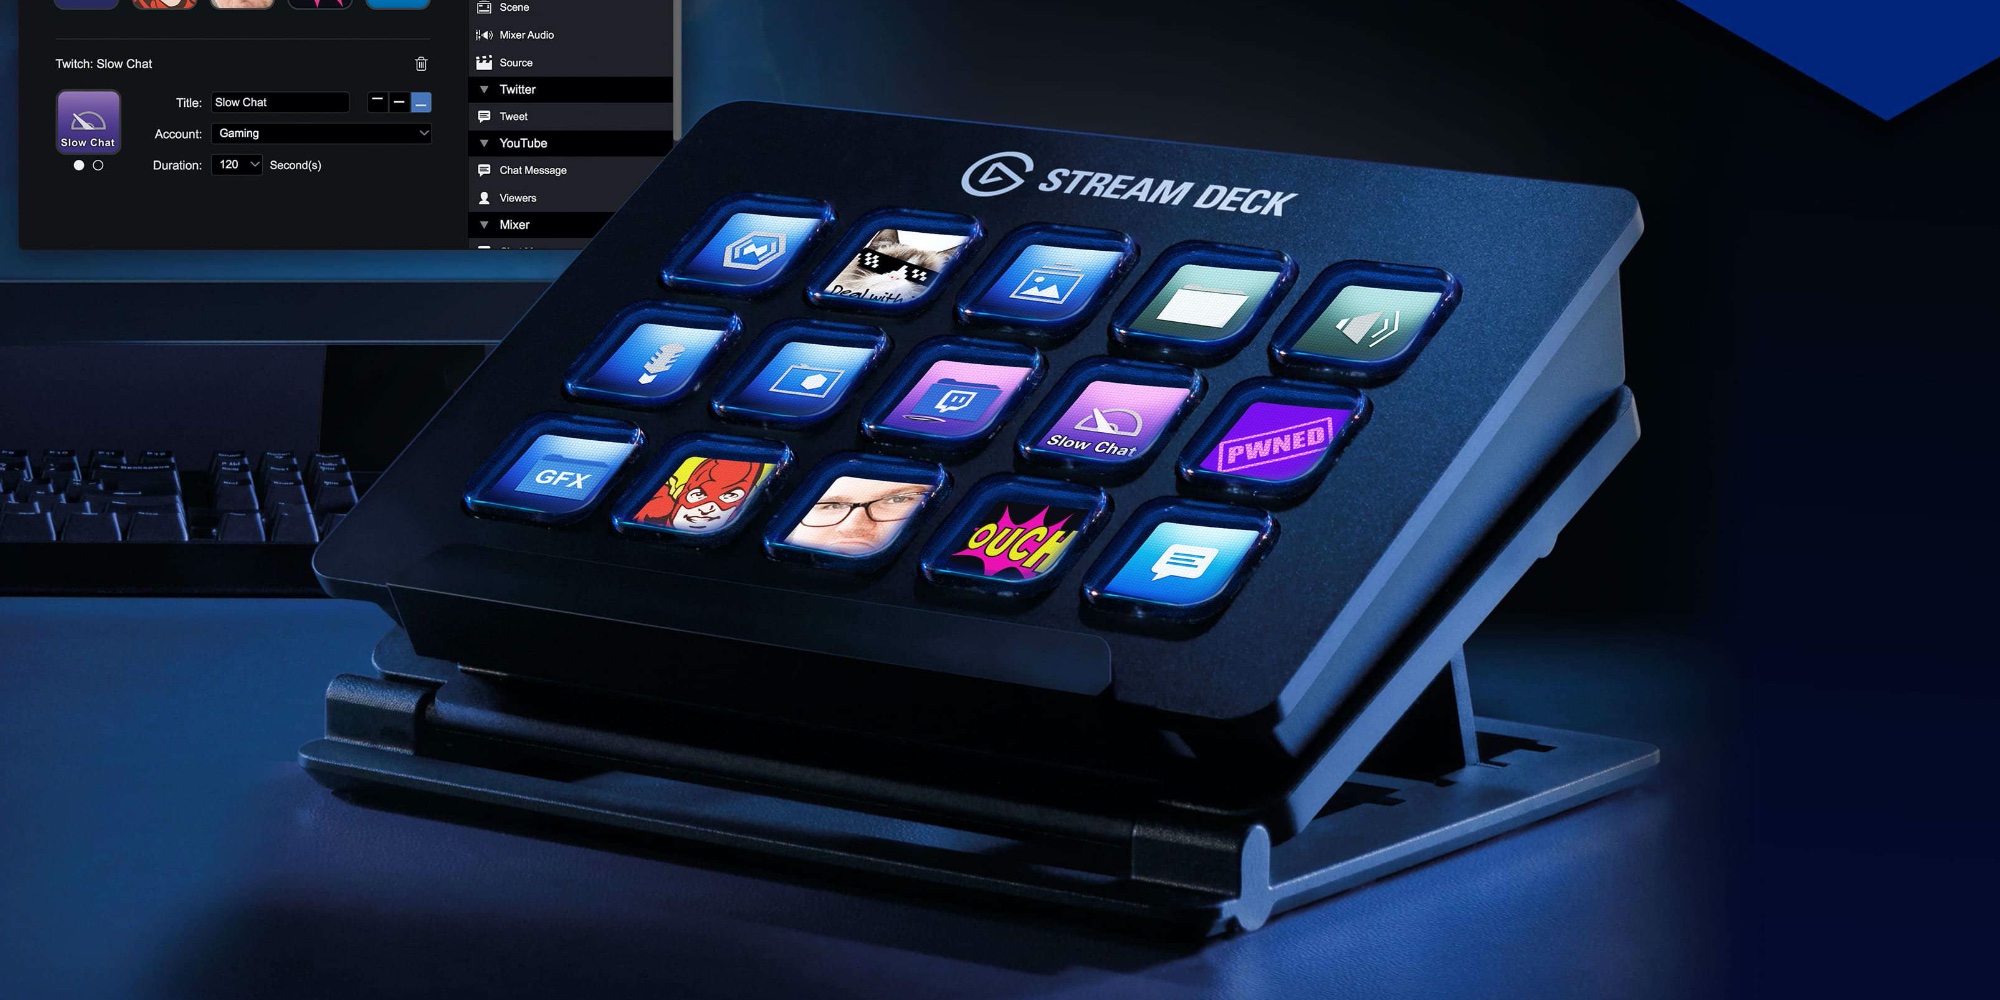 Upgrade your streaming setup with an Elgato Stream Deck now and 